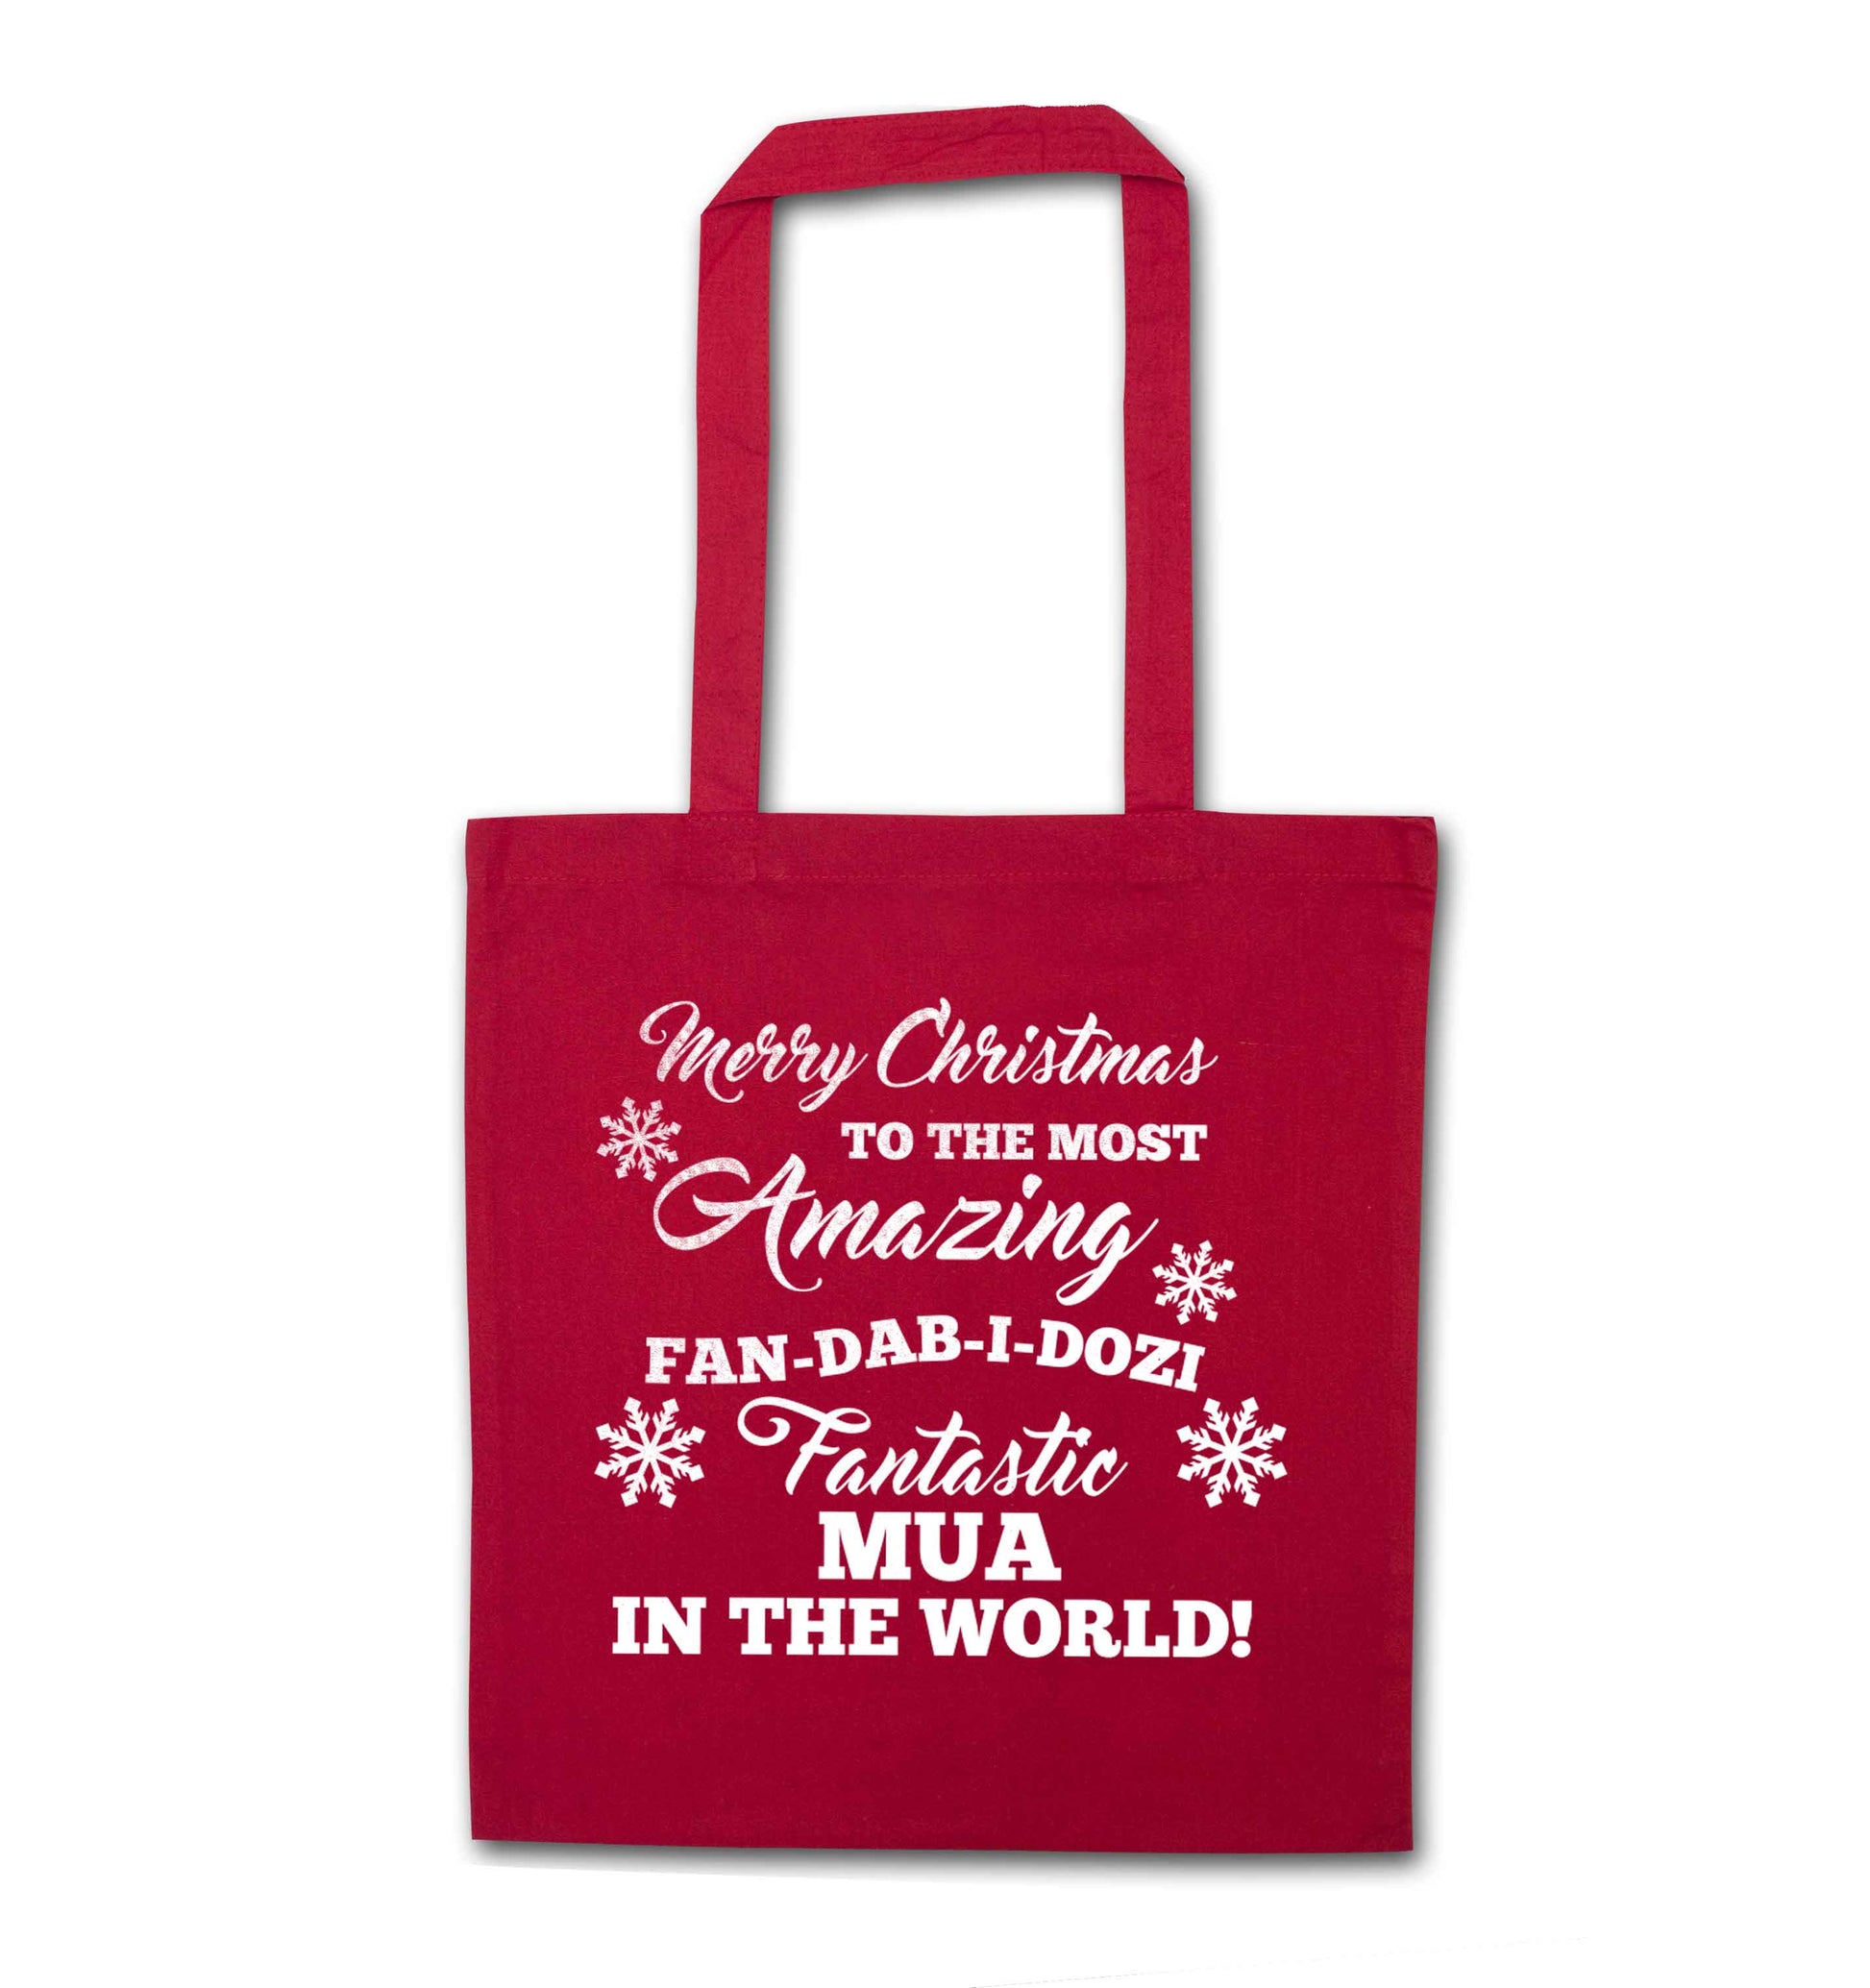 Merry Christmas to the most amazing fan-dab-i-dozi fantasic MUA in the world red tote bag